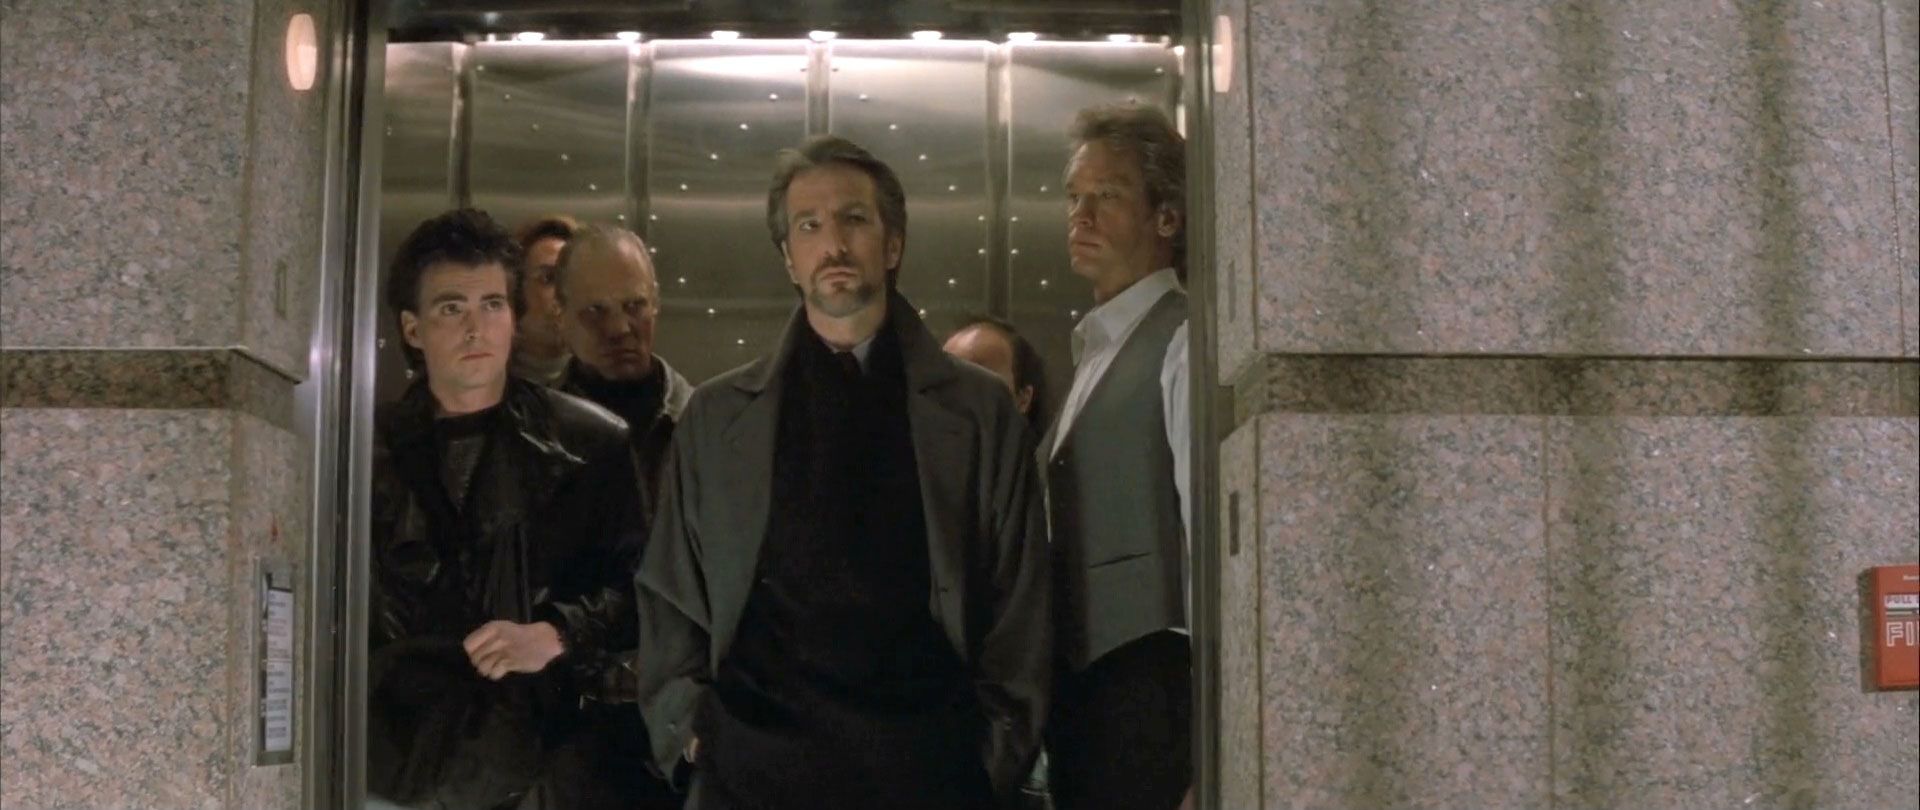 Hans Gruber and the villains arriving on the elevator in Die Hard